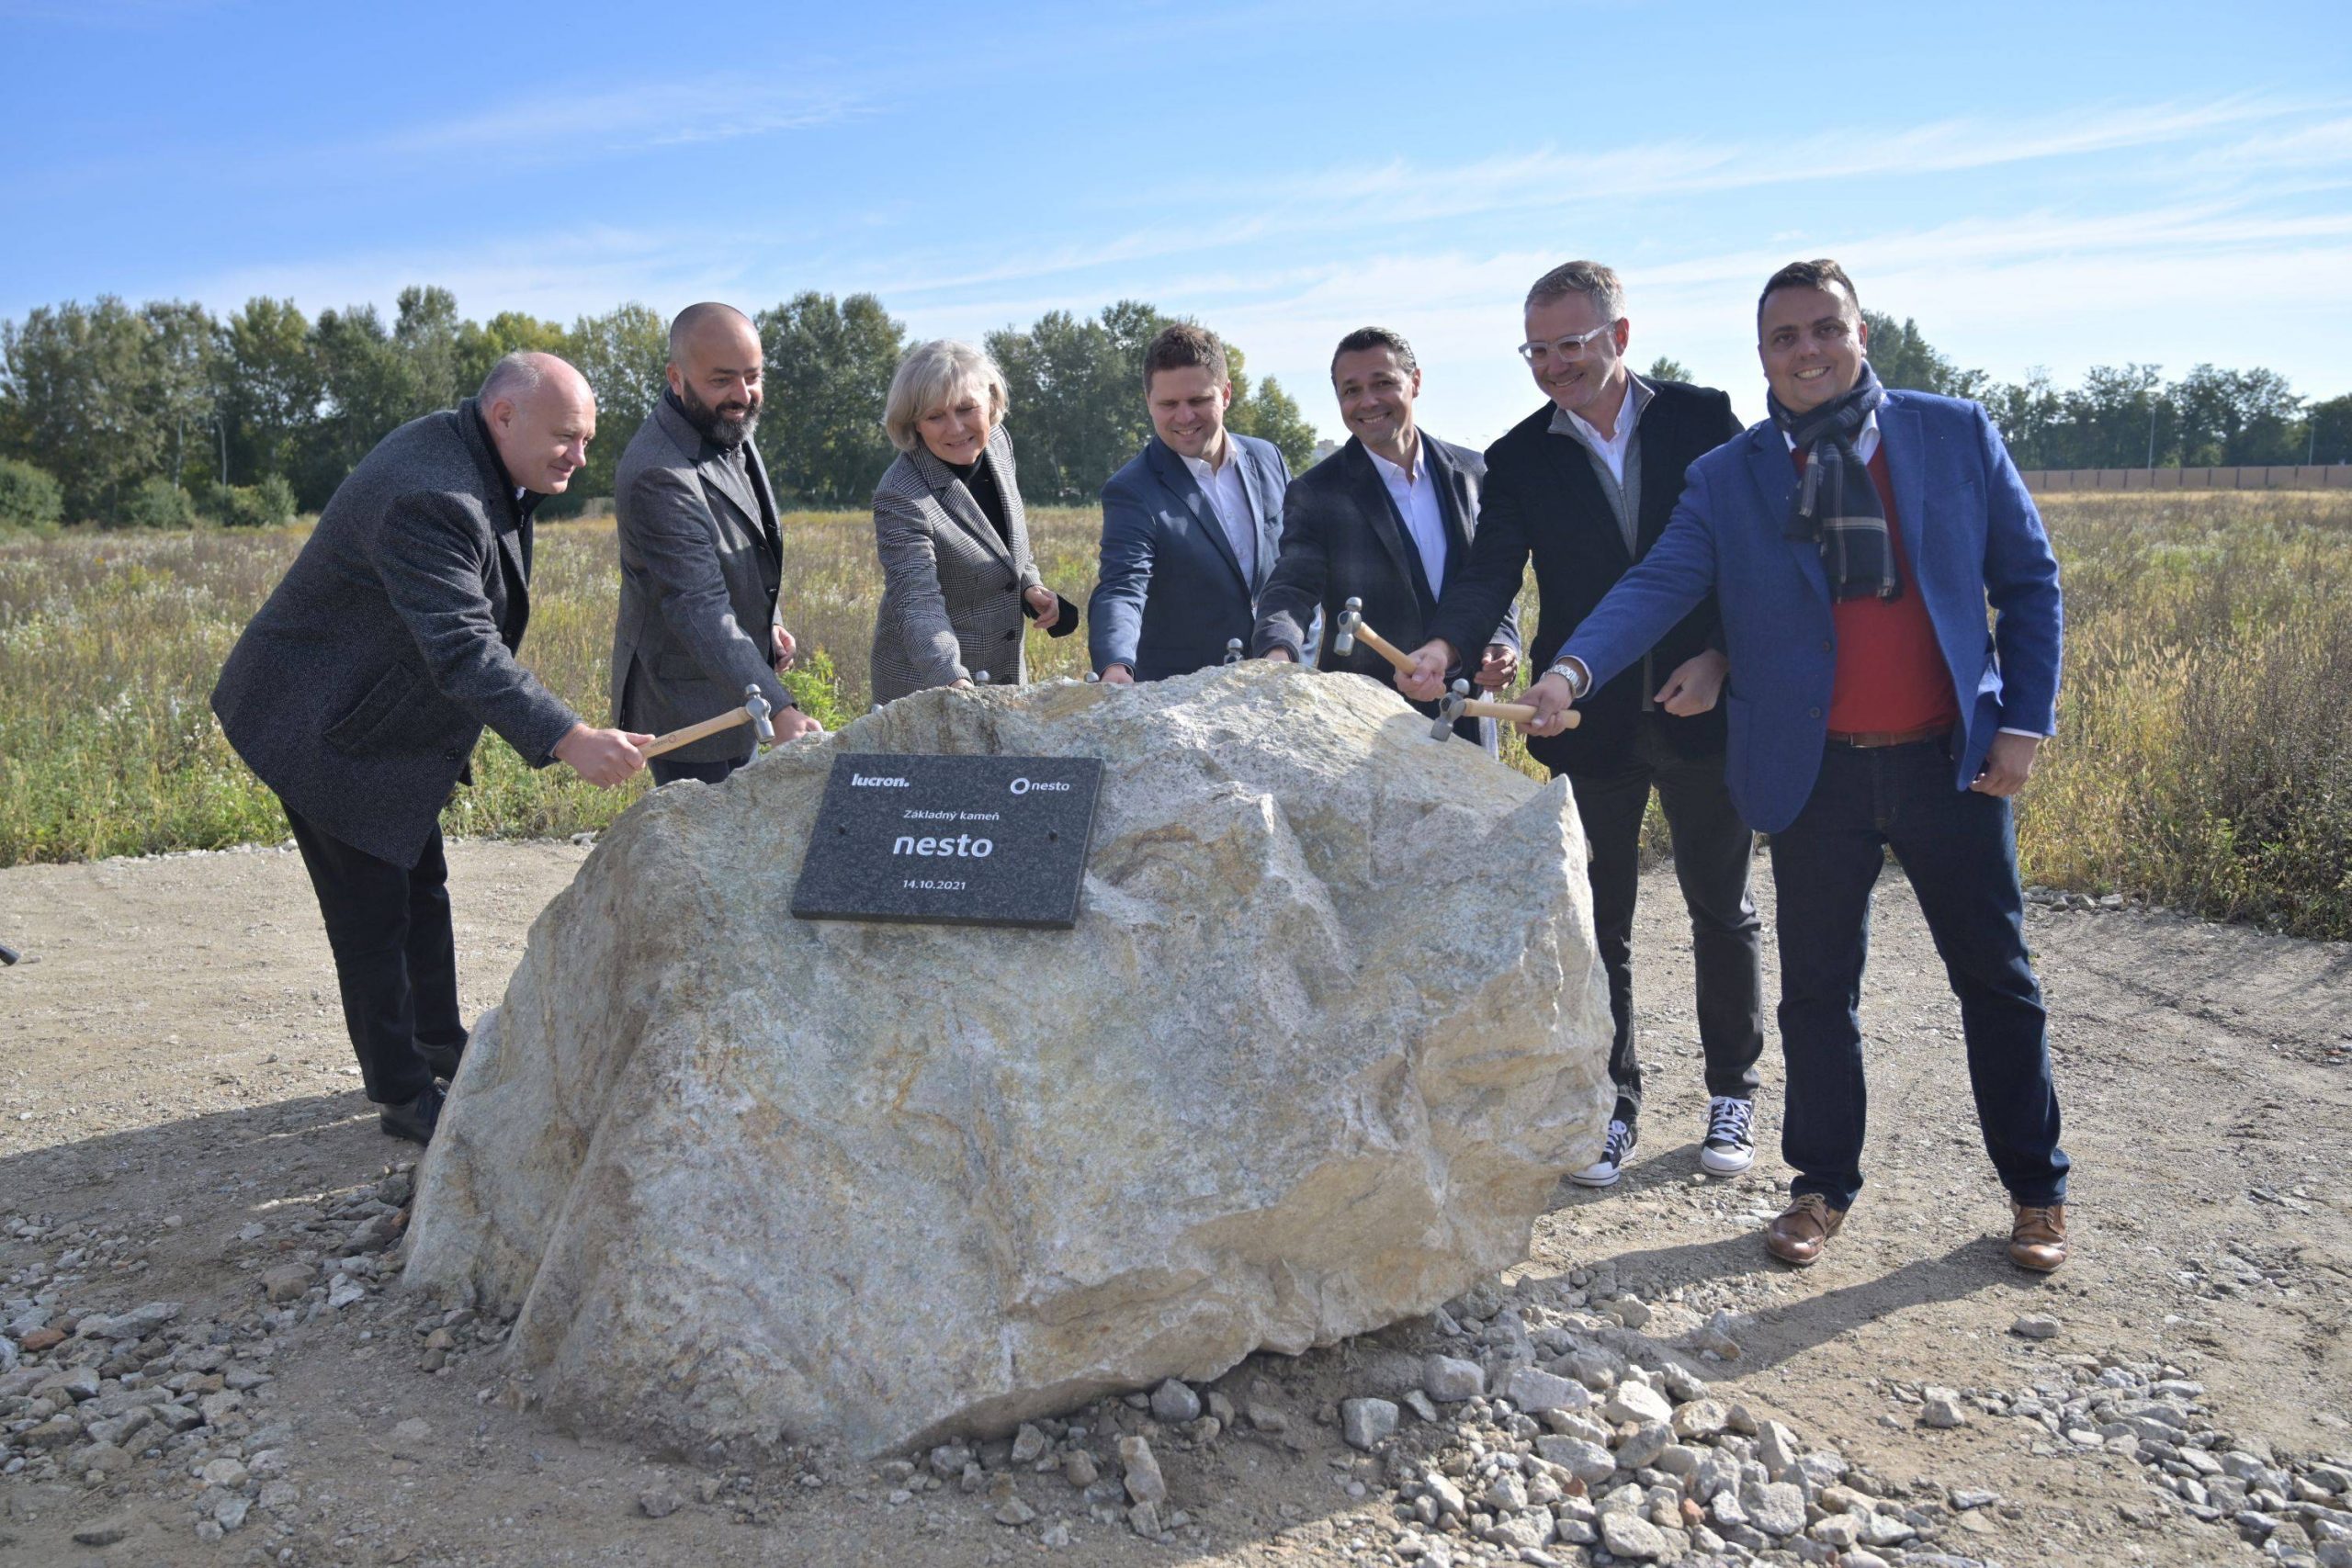 Construction of the new Nesto district in Bratislava launched